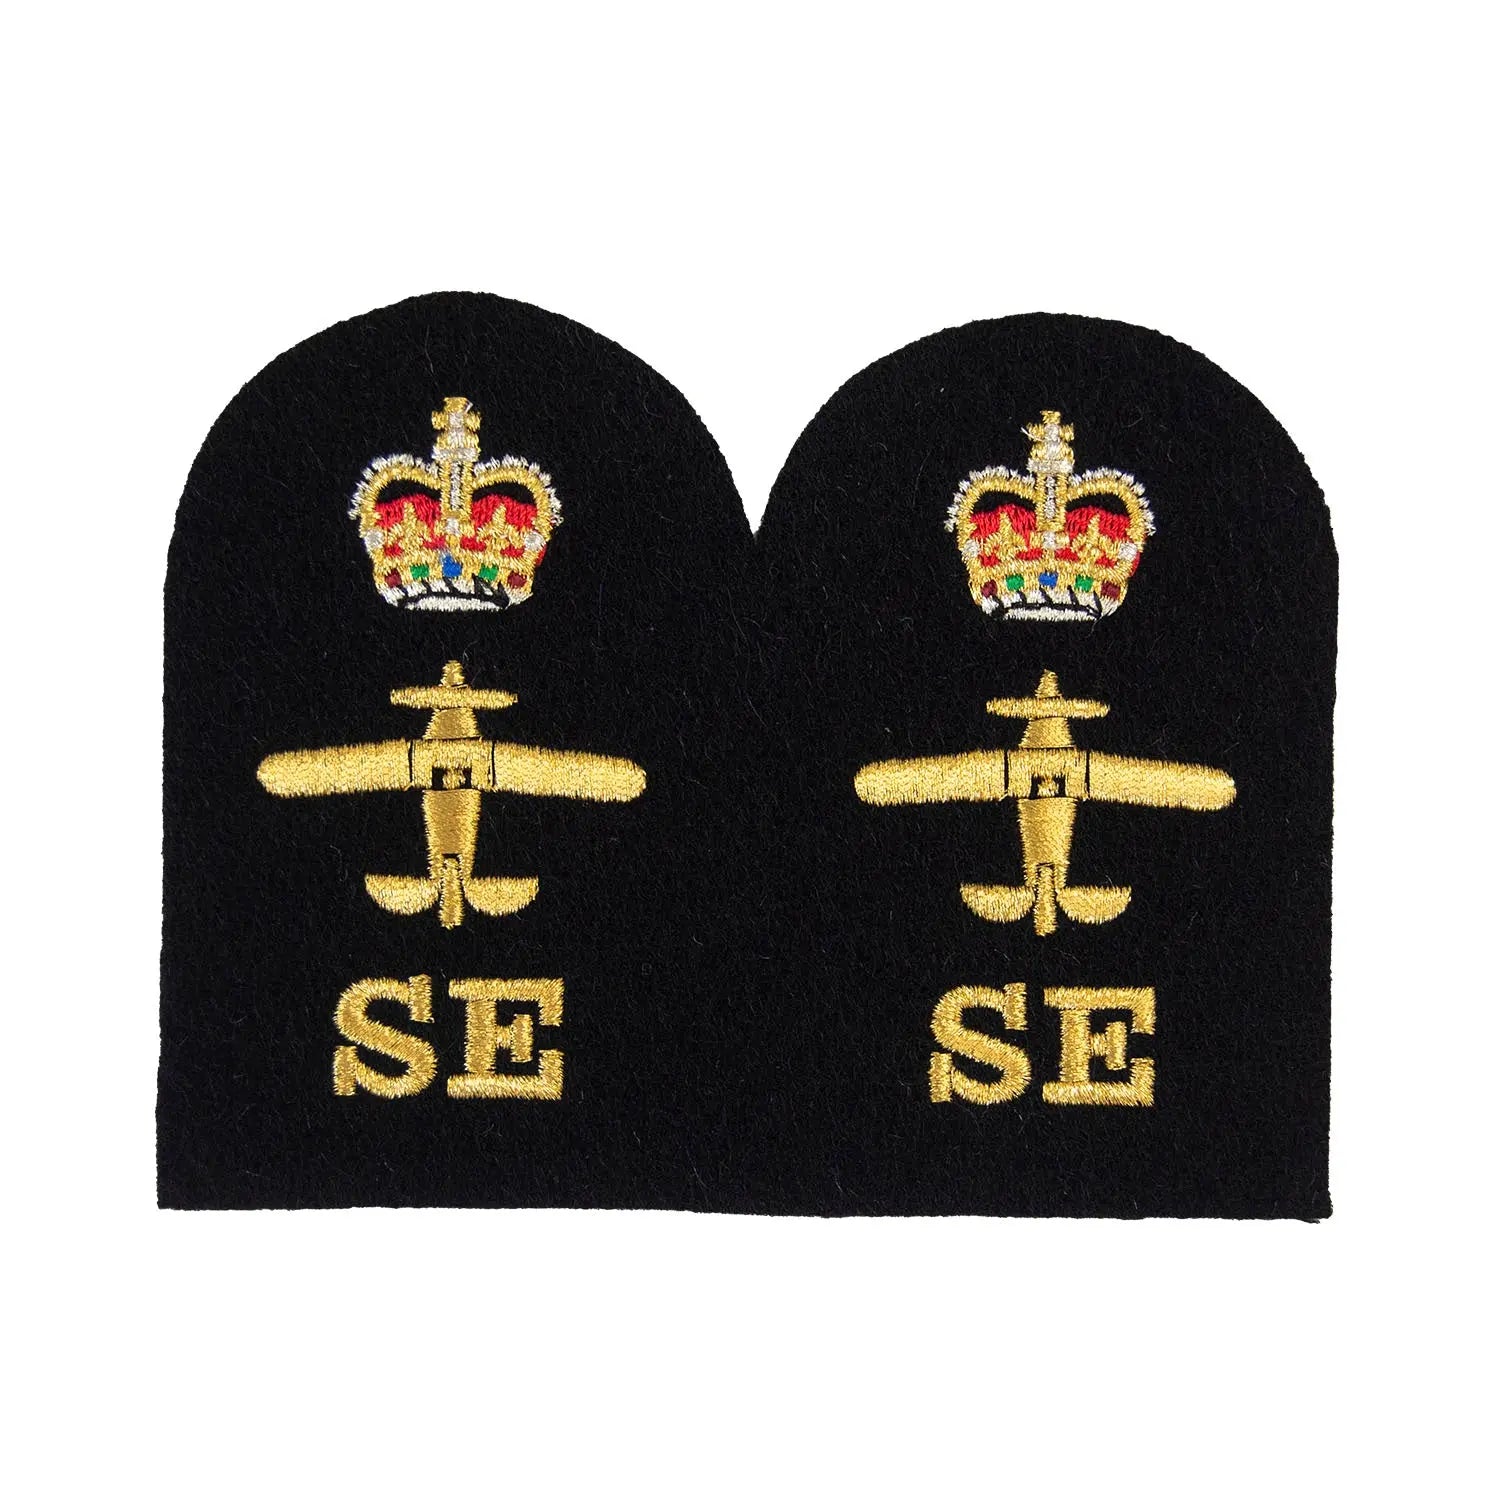 Survival Equipment (SE) Chief Petty Officer Royal Navy Badges wyedean